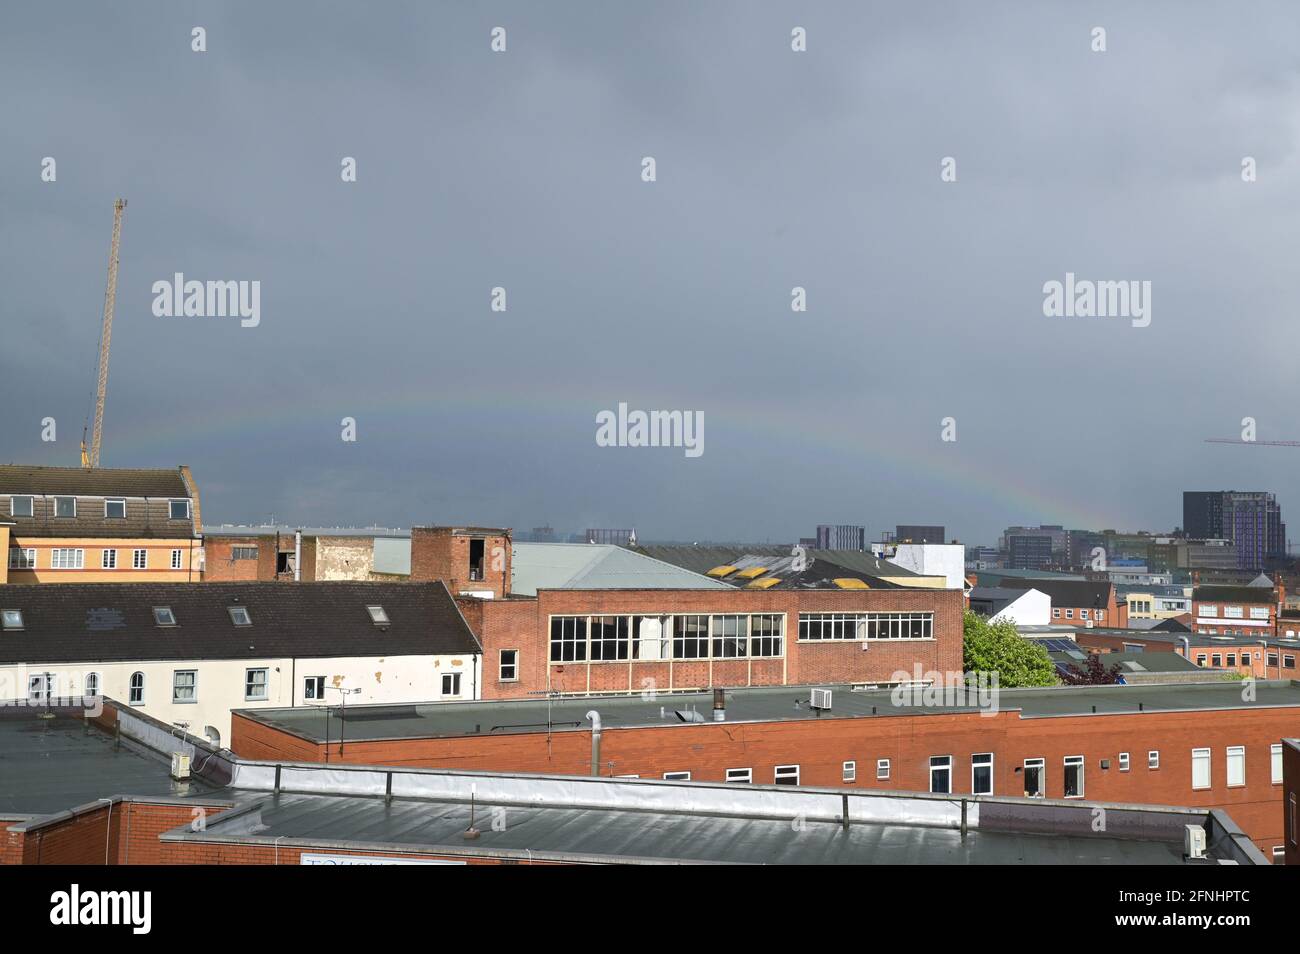 Aston, Birmingham, West Midlands, UK. 17th May 2021. A rare low rainbow formed over the Aston area of Birmingham city centre, England this afternoon as heavy rain hit many parts of the country. The bow was unusually low and started from the faculty building at the right of the image. Pic by Sam Holiday/Alamy Live News Stock Photo